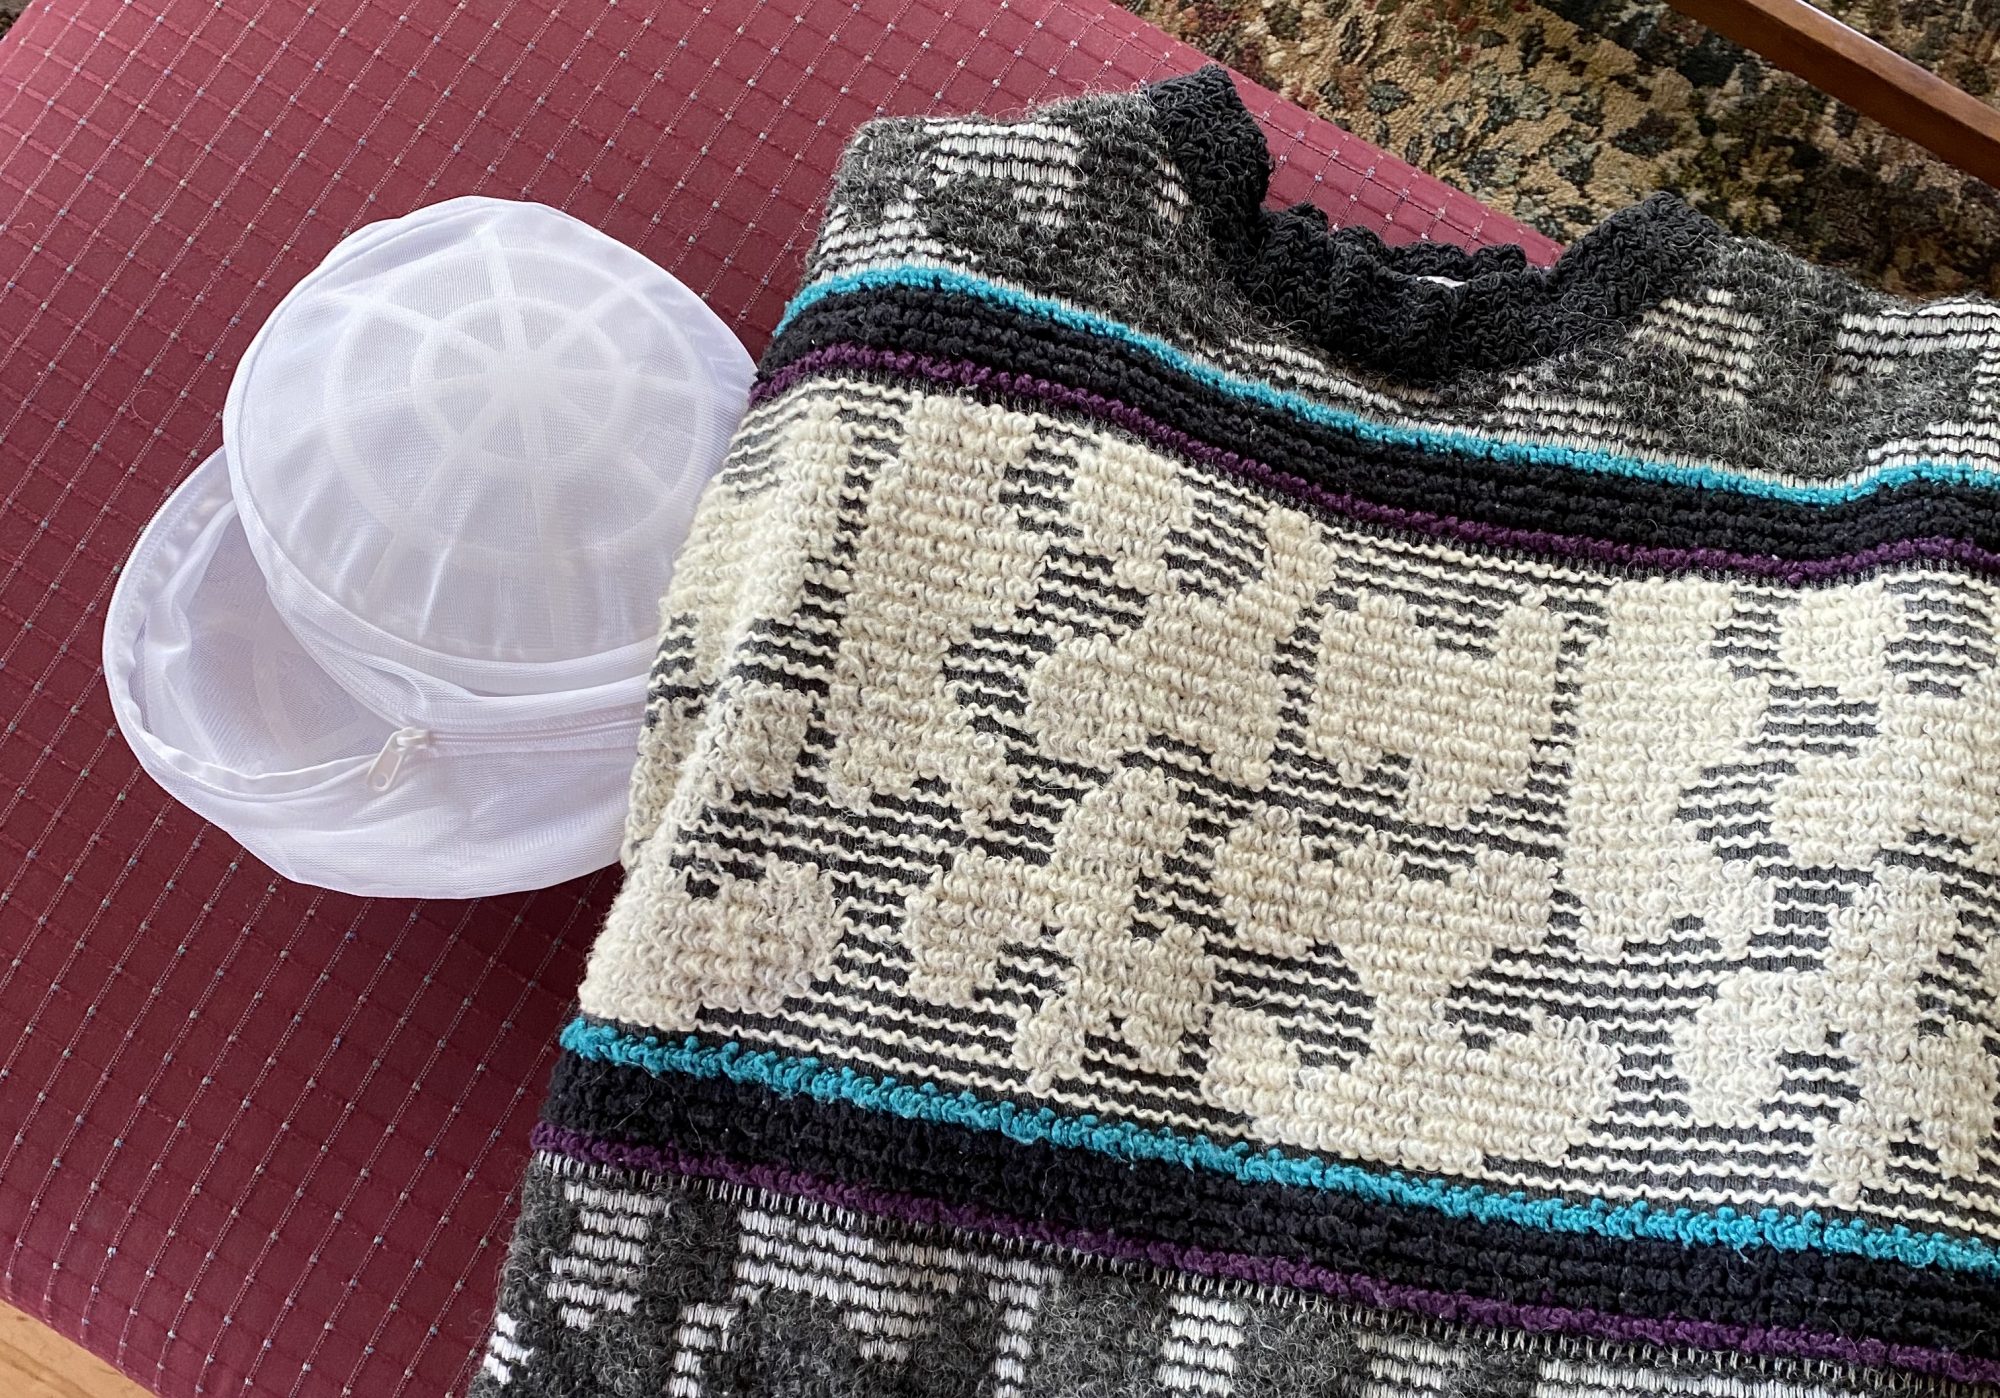 I fit this big, bulky sweater into this tiny mesh laundry bag.